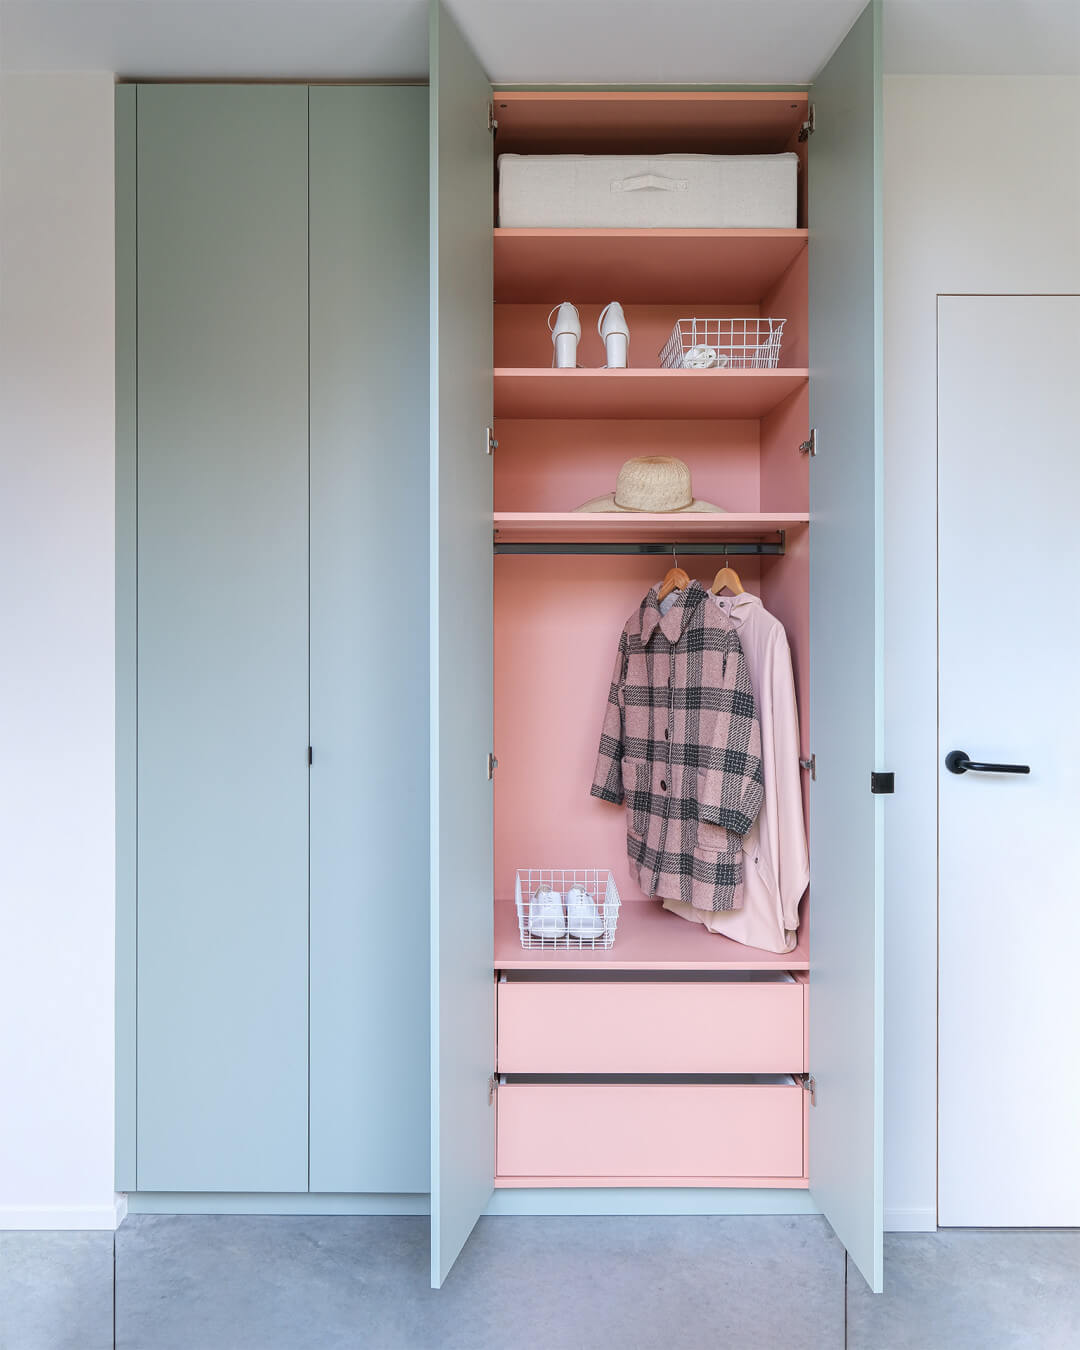 Wardrobe in the colors Industrial Green and Dusty Coral.